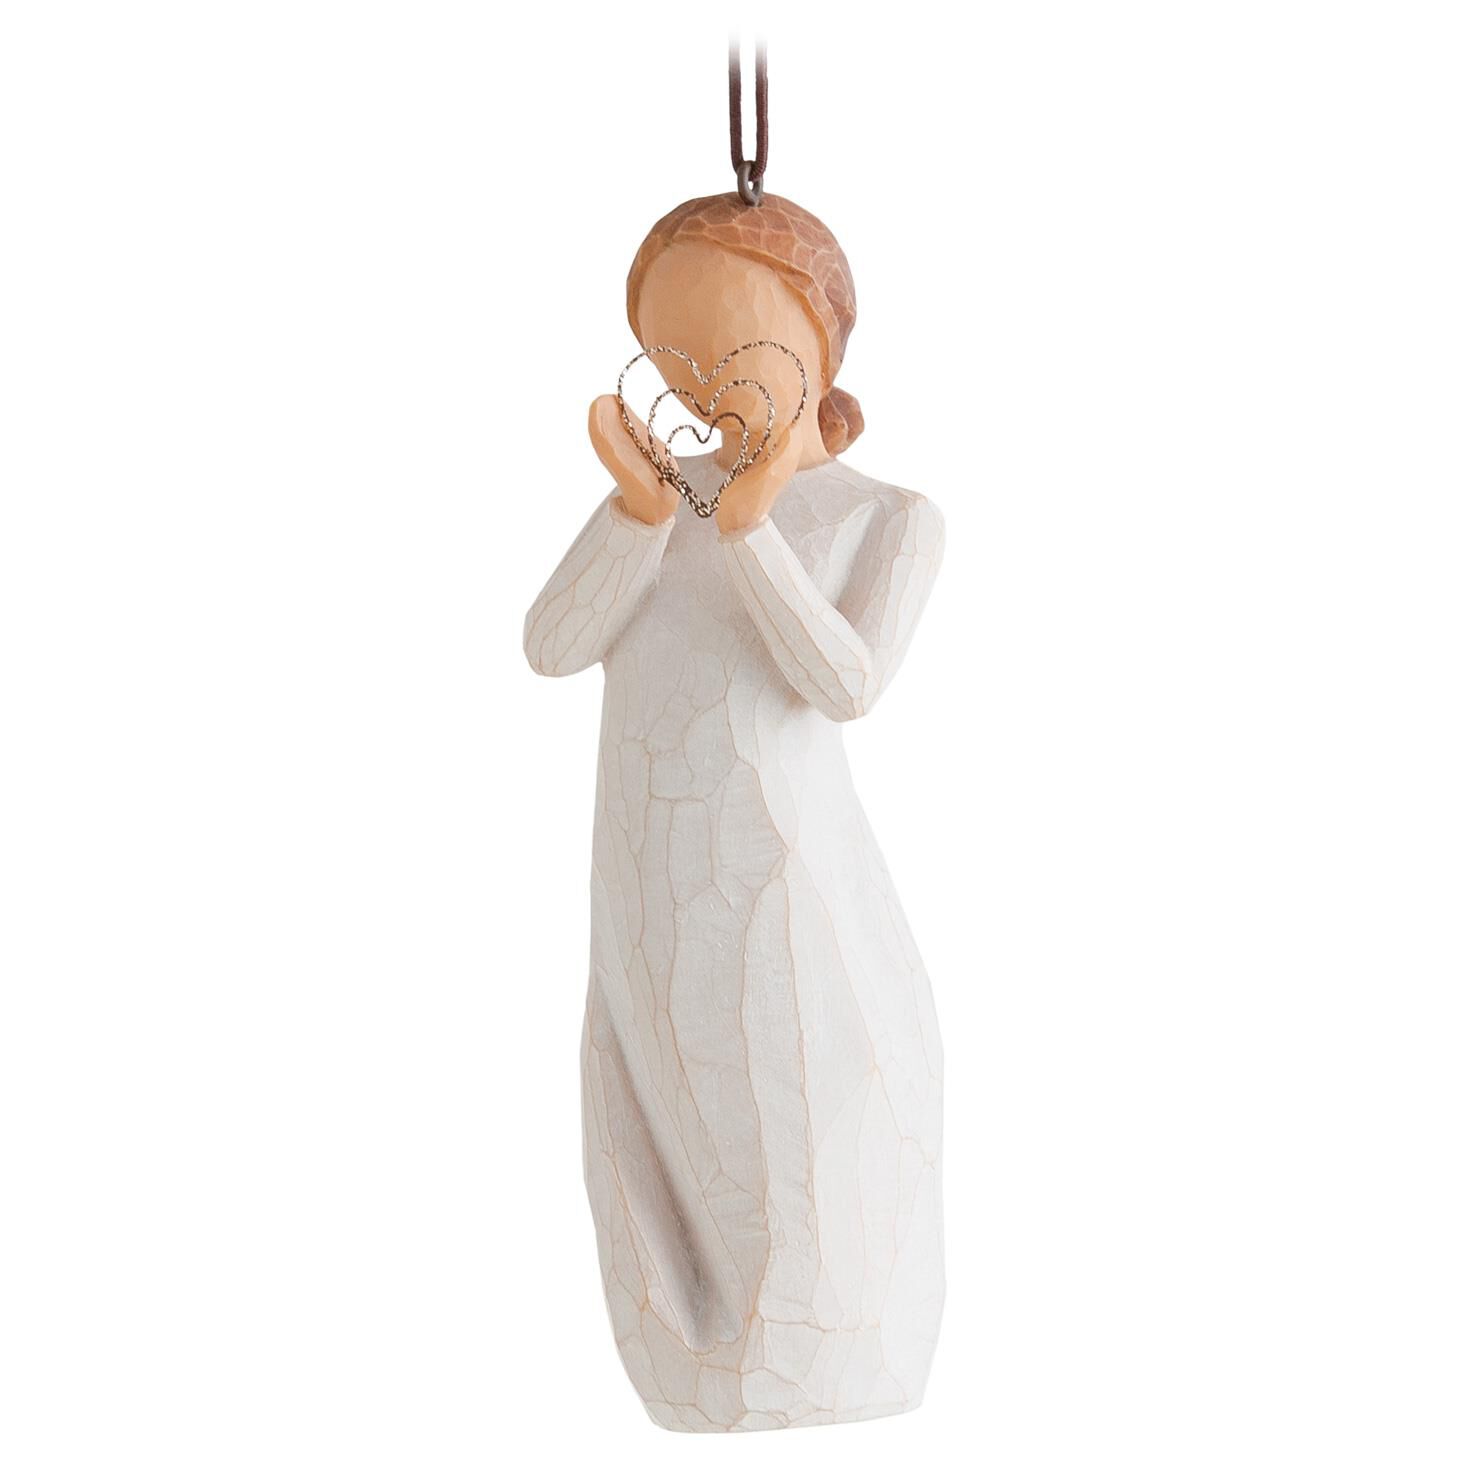 Sculpted Hand-Painted Figure Willow Tree Song of Joy Ornament 